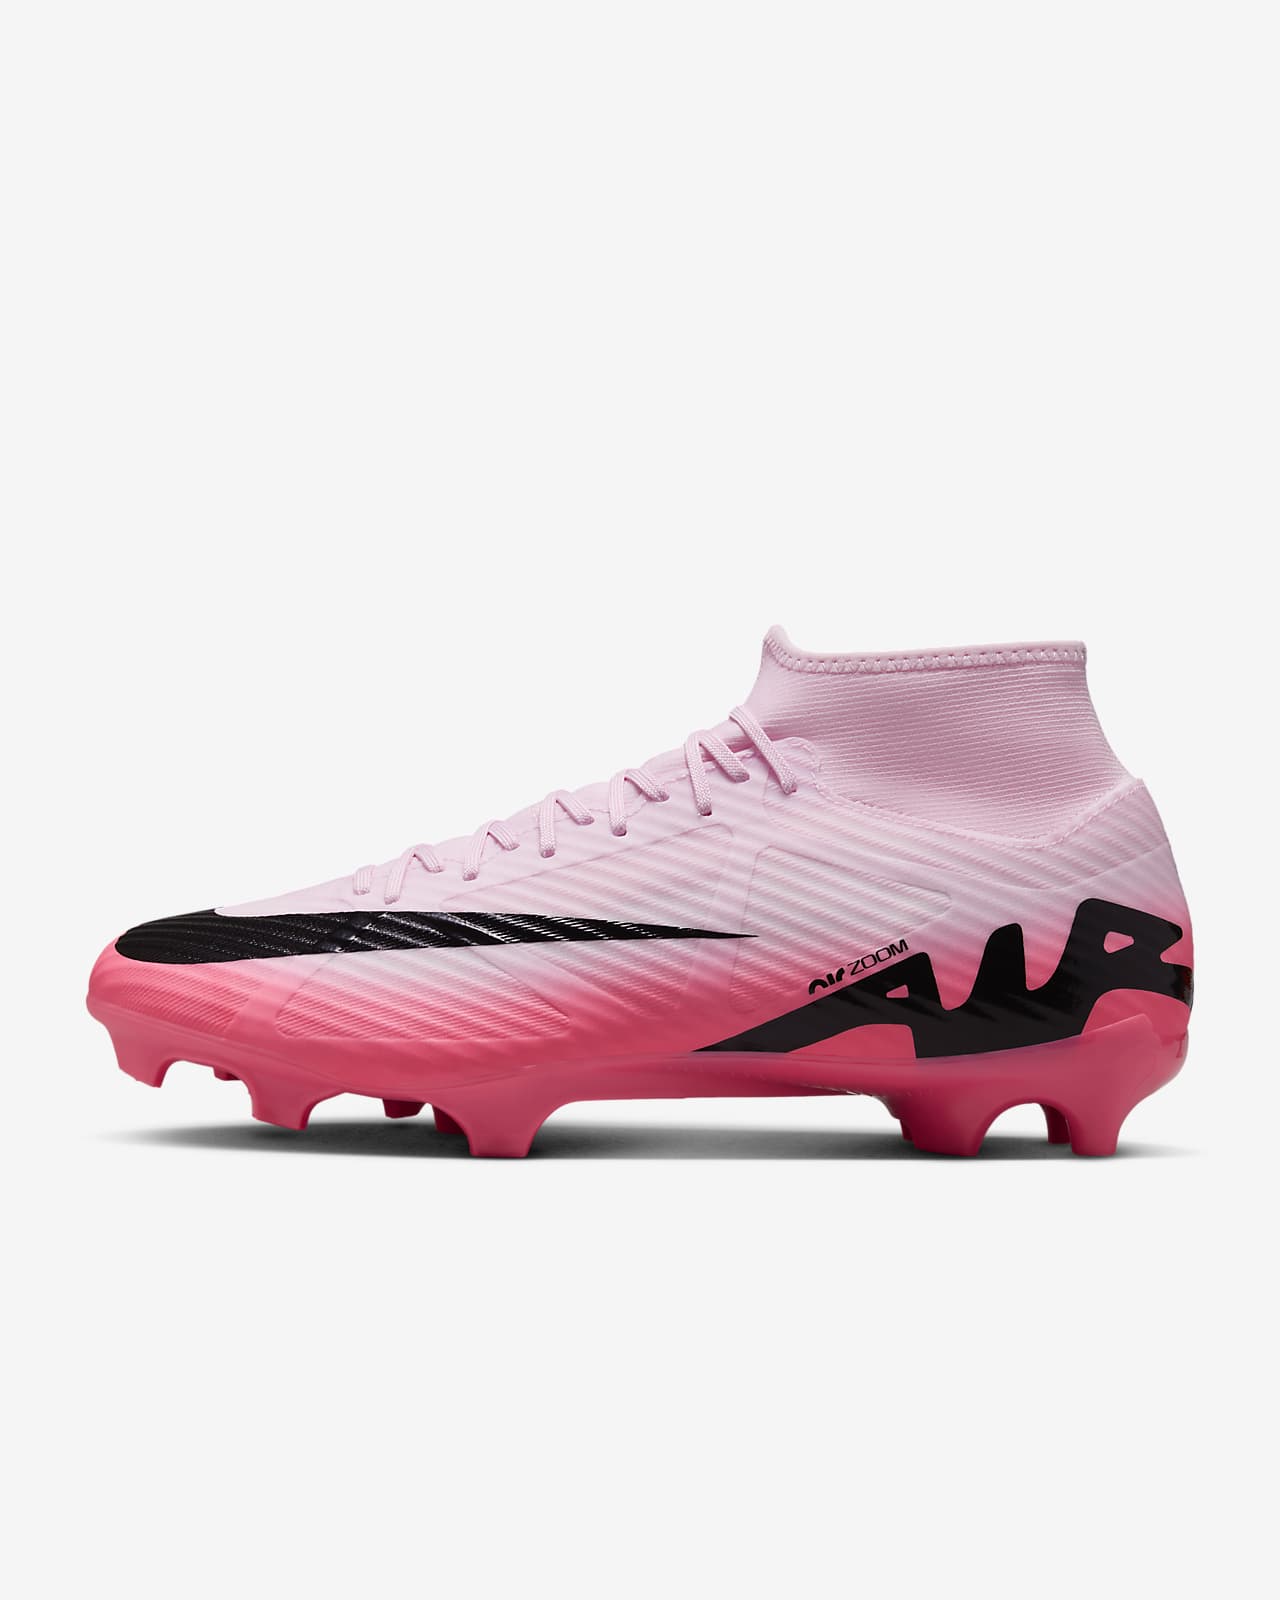 Chaussure de foot montante à crampons multi-surfaces Nike Mercurial Superfly 9 Academy